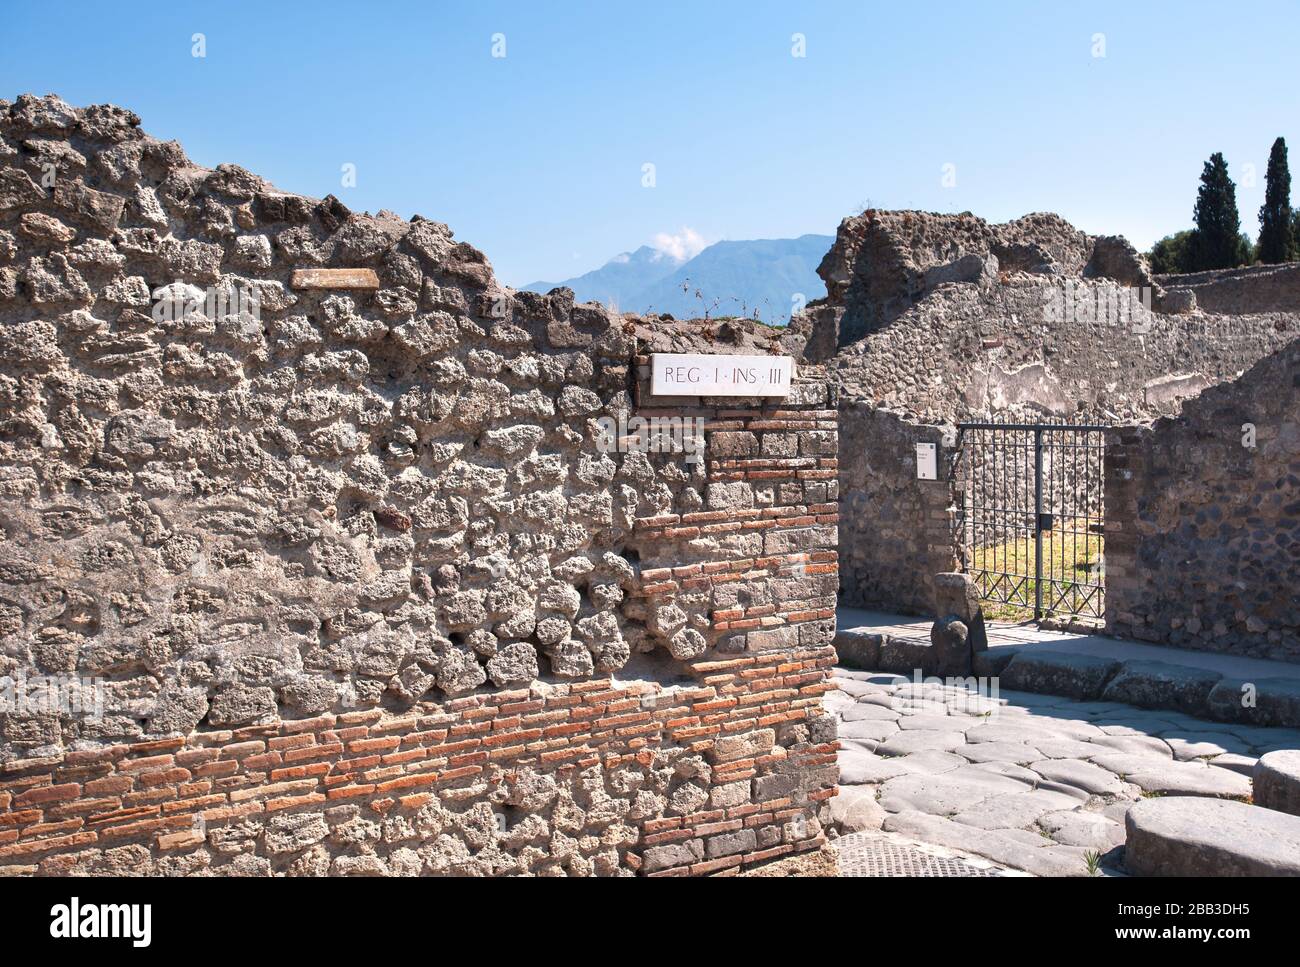 Ancient street and ruined houses in the ancient town of Pompeii, Italy. The peak of Mount Vesuvius can be seen in the background. Stock Photo